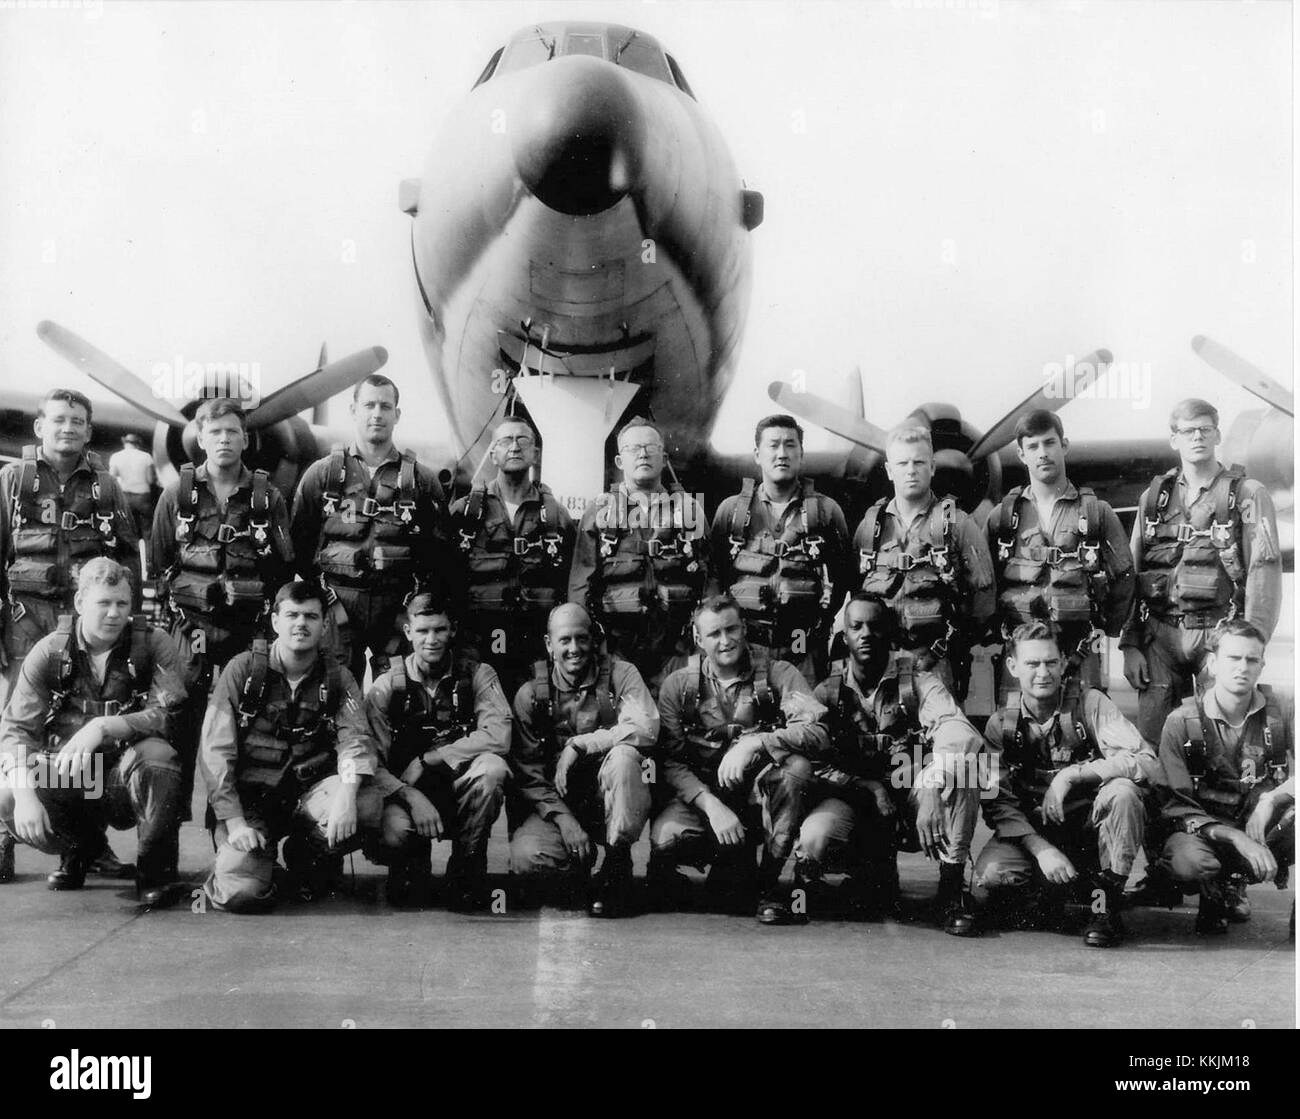 Det 1, 552d Airborne Early Warning and Control Wing - Gruppenfoto Stockfoto